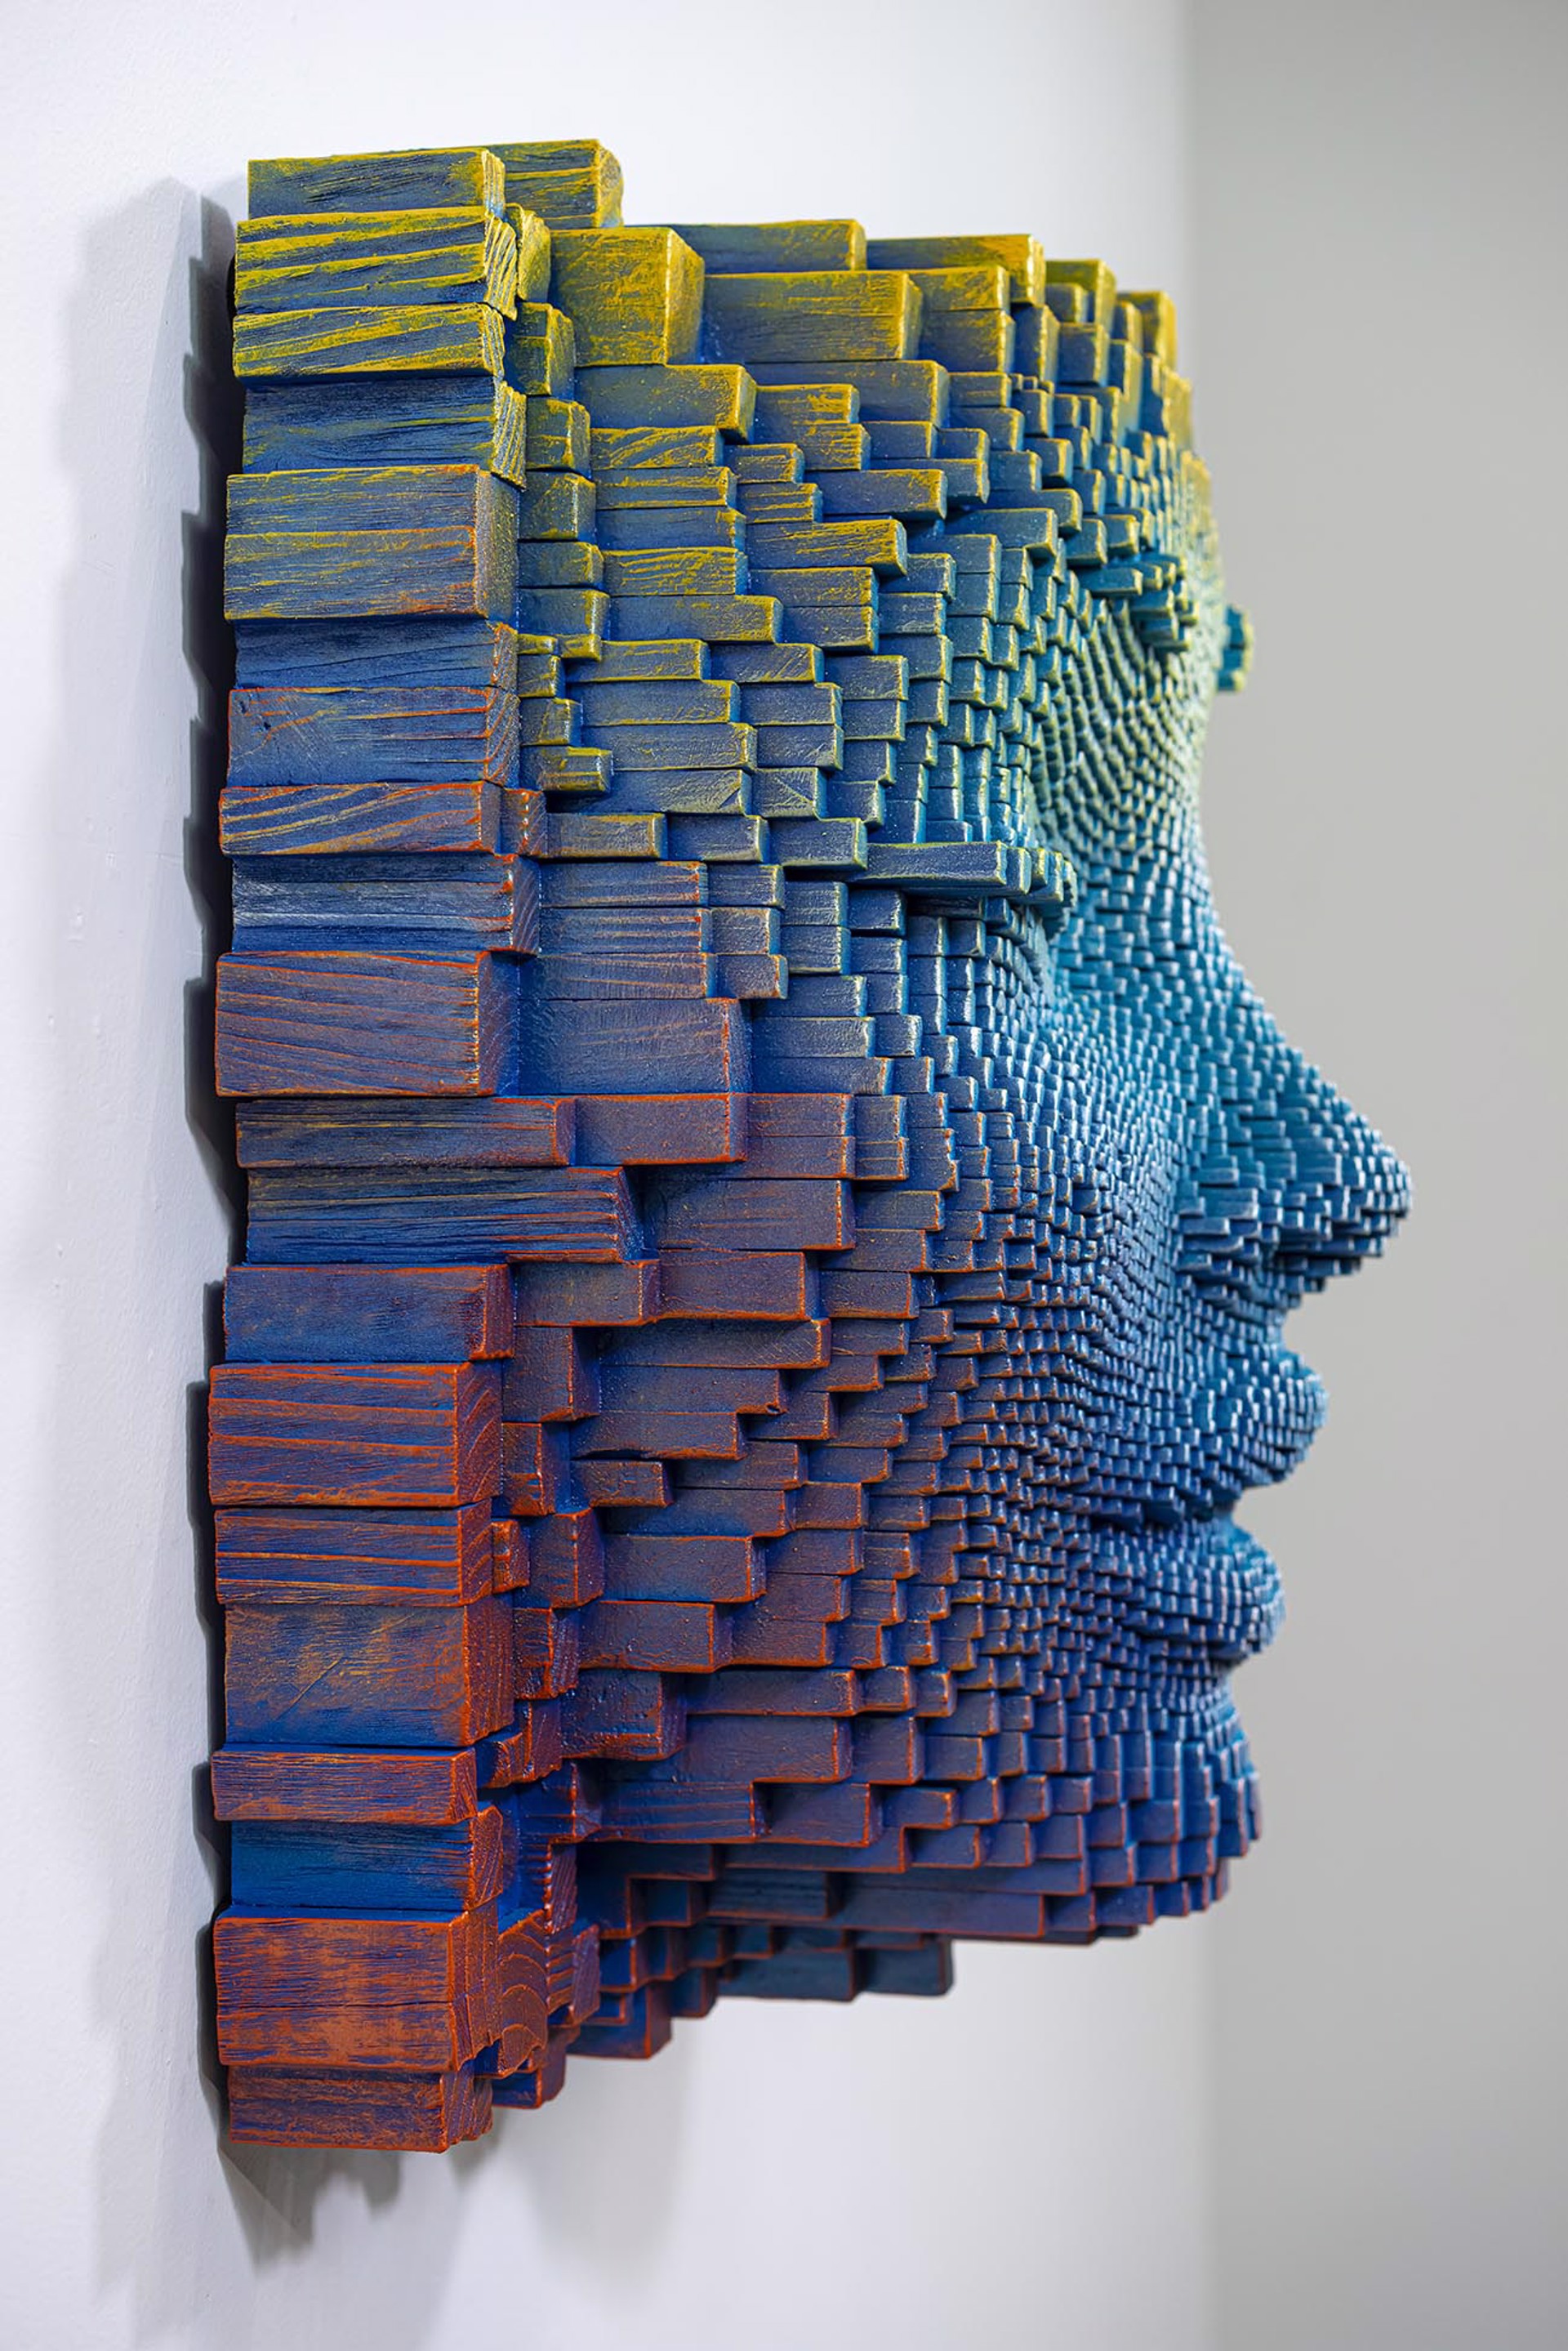 Mask #219 by Gil Bruvel